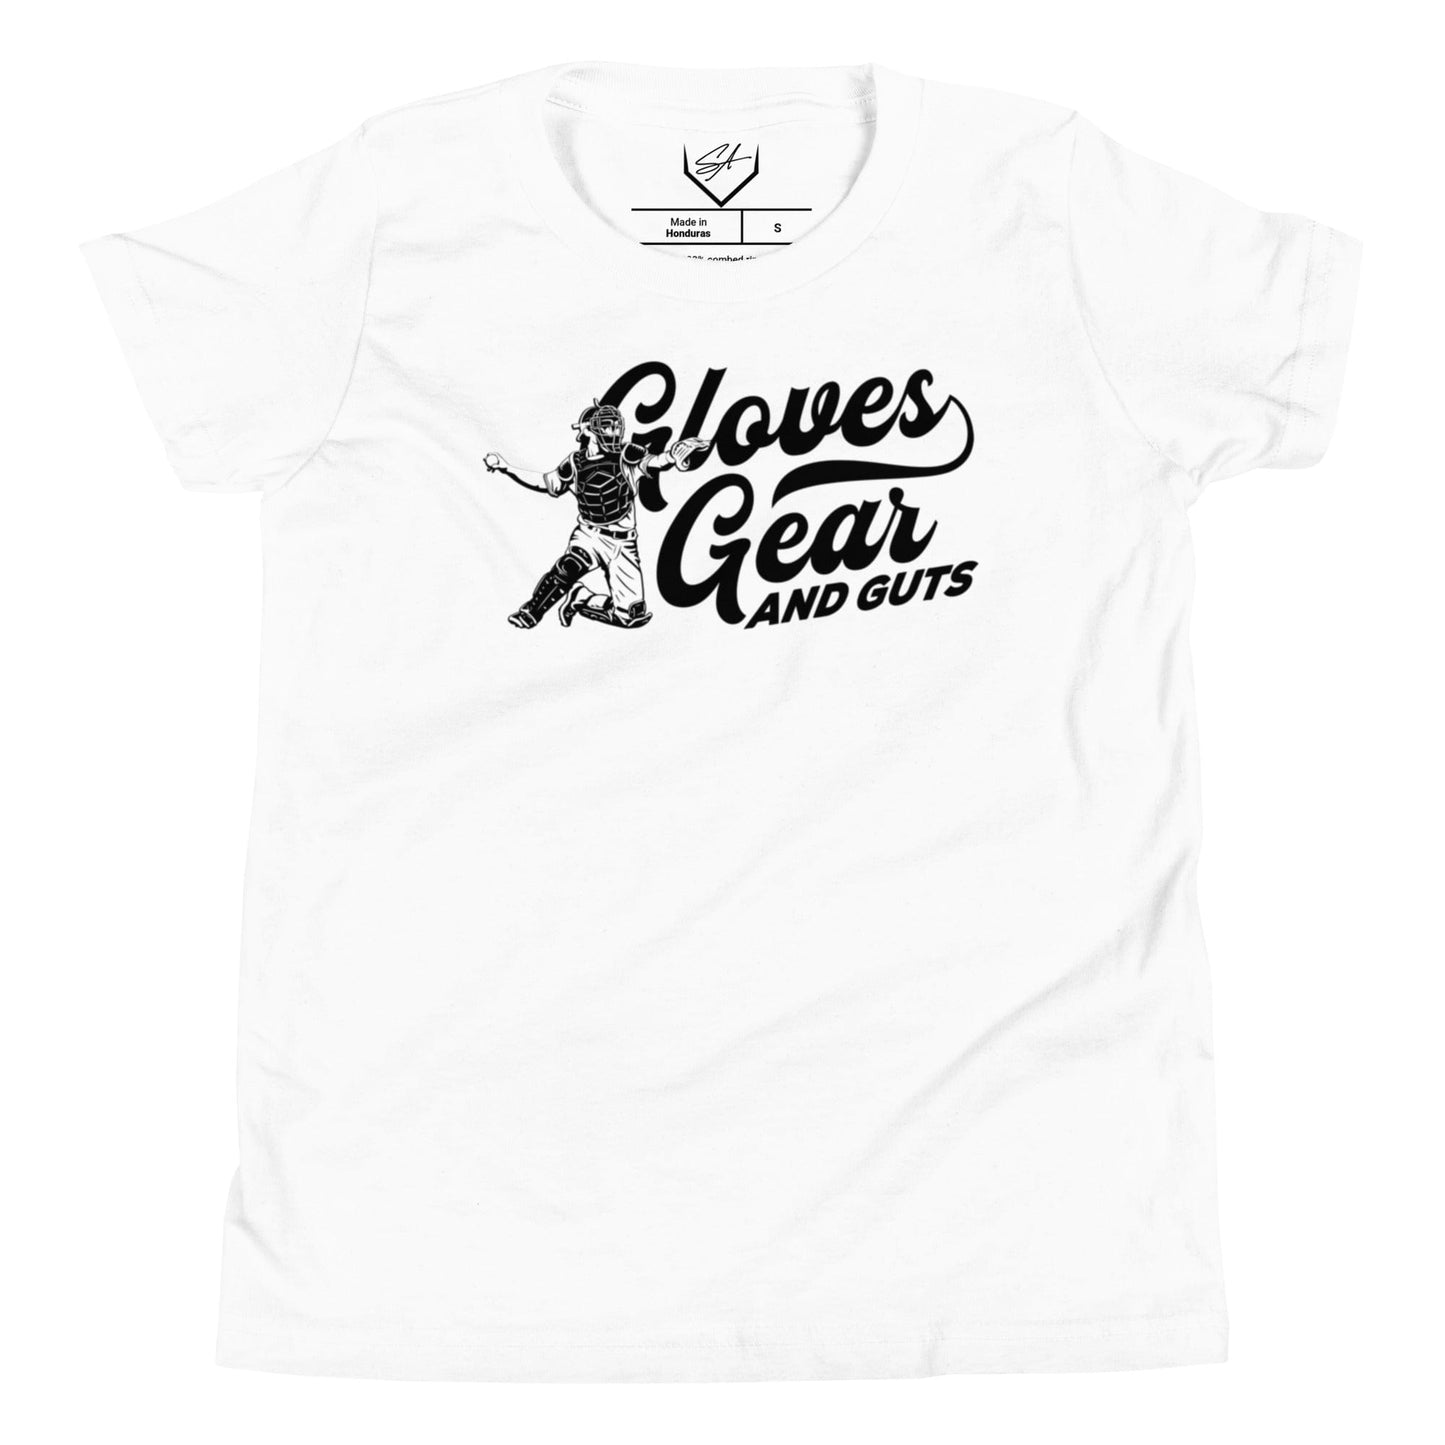 Gloves Gear And Guts - Youth Tee